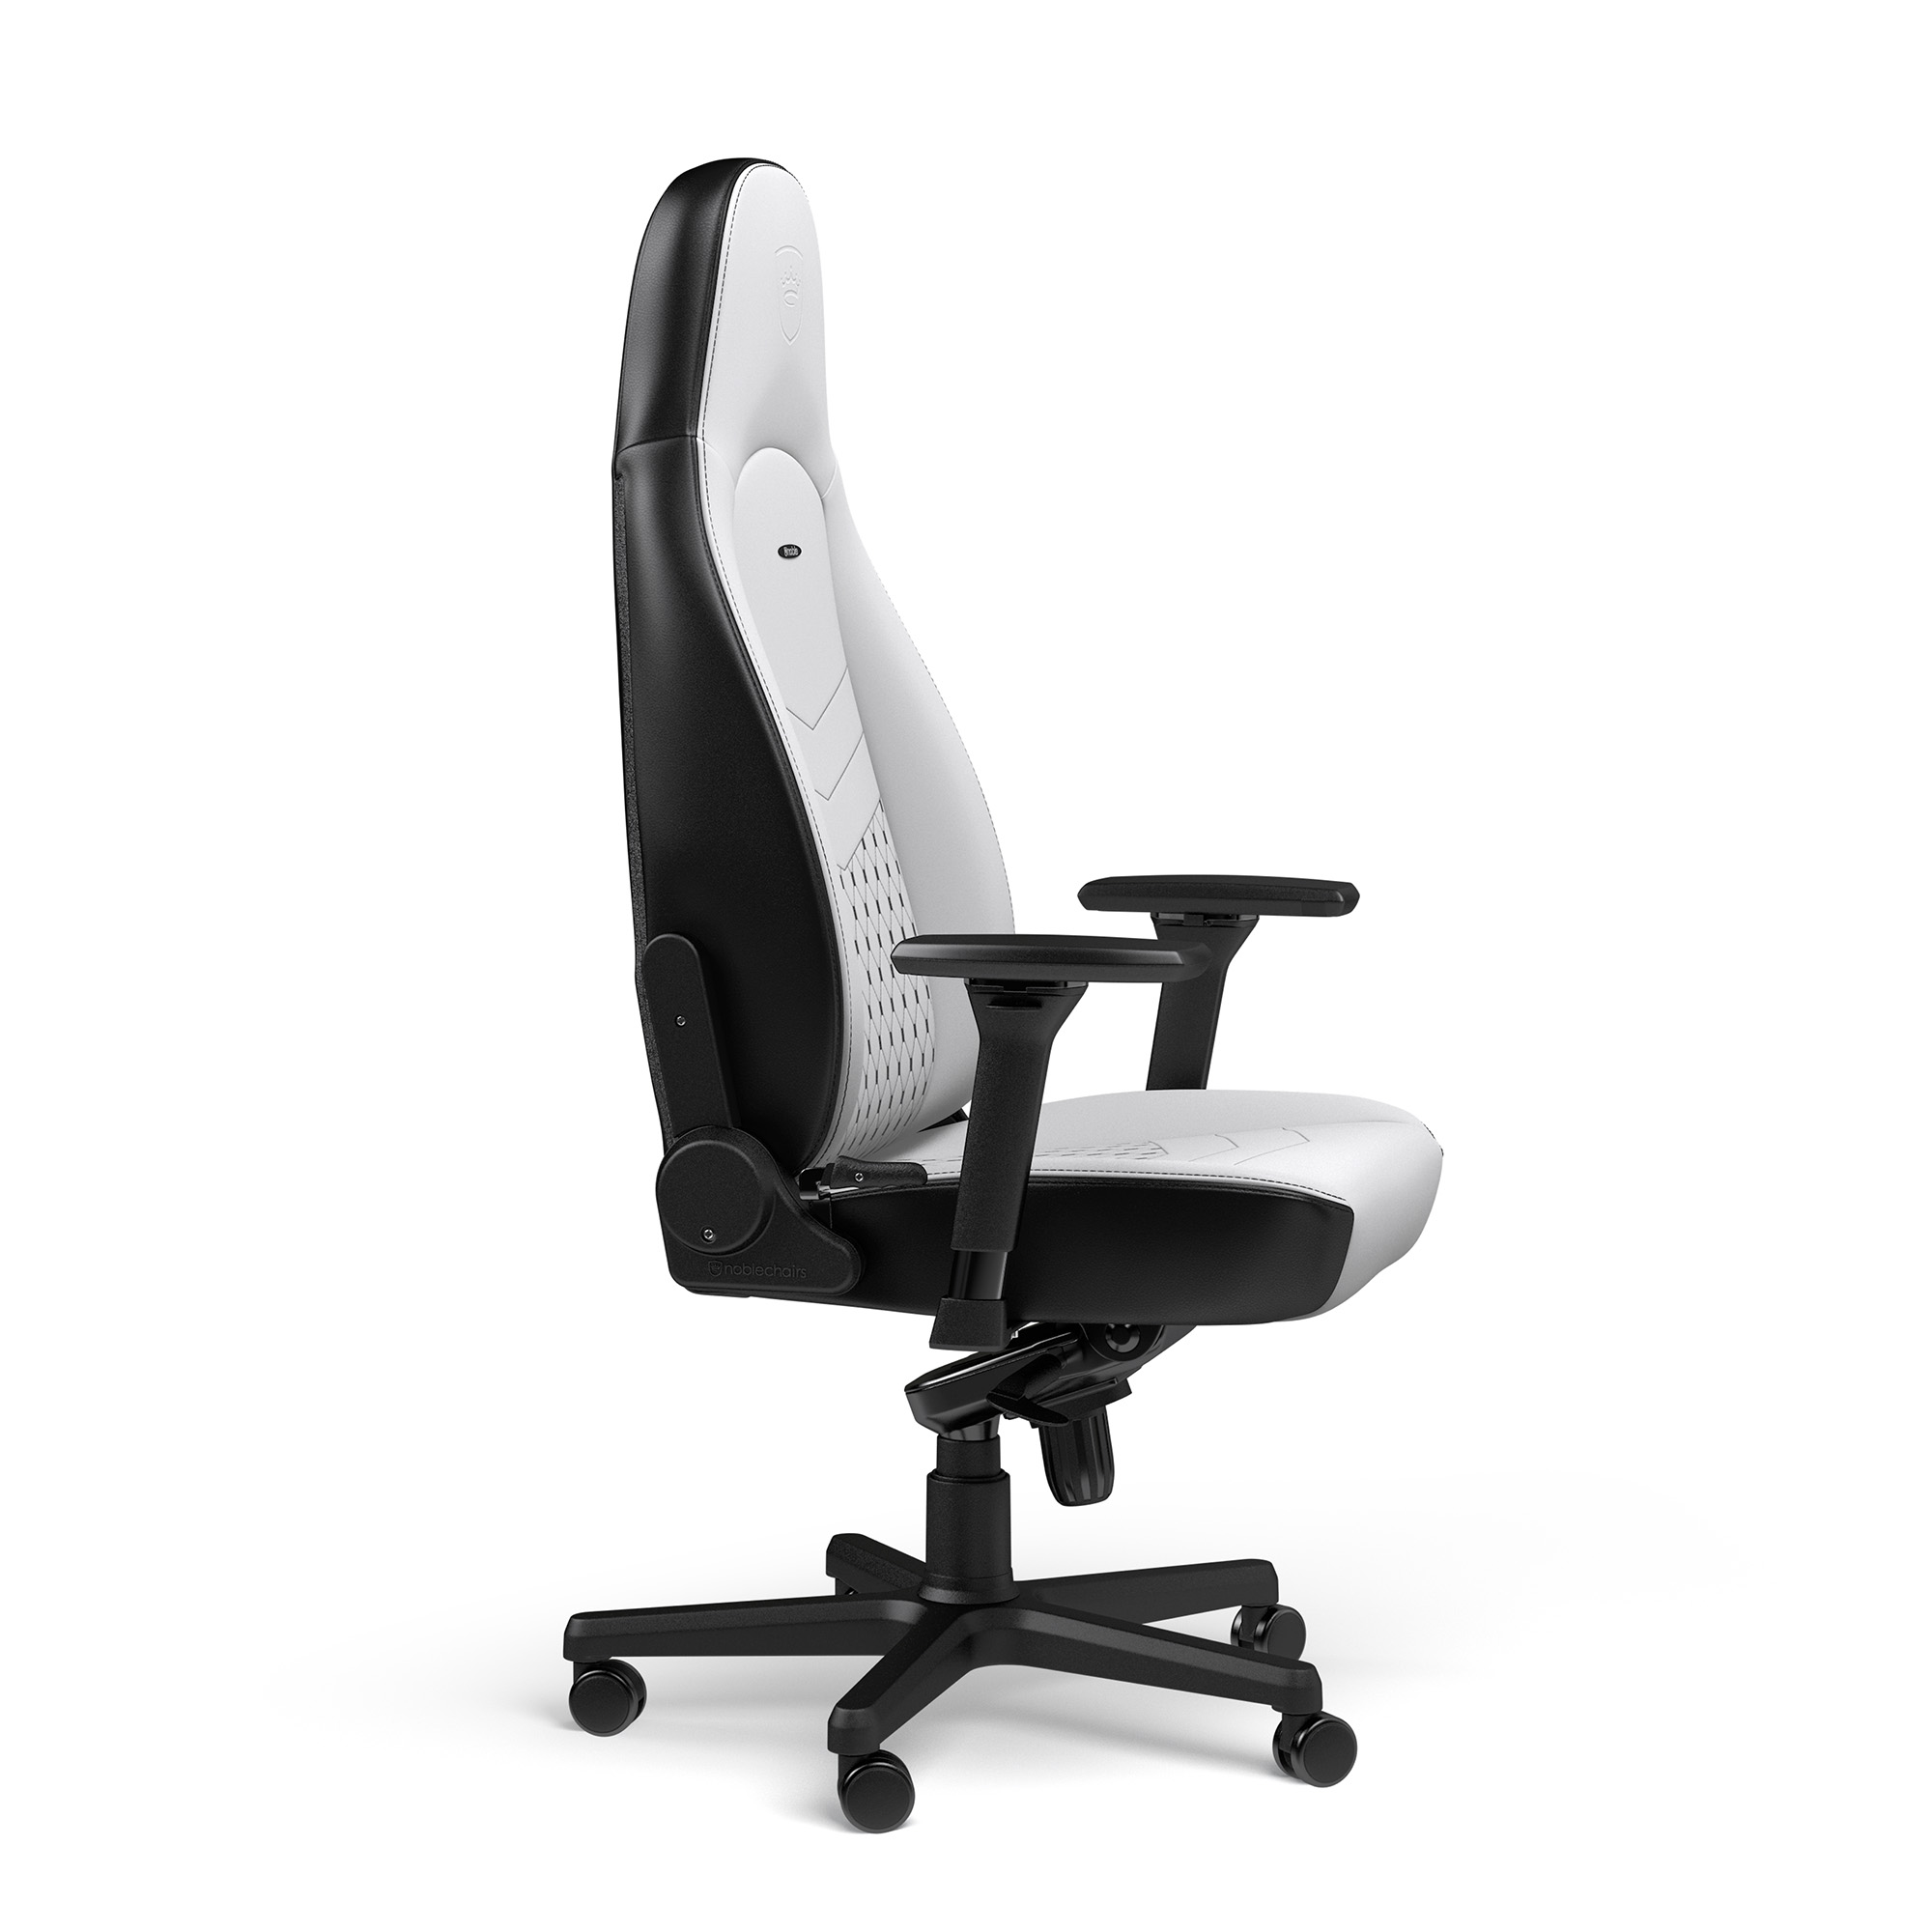 noblechairs - noblechairs ICON Gaming Chair - White/Black